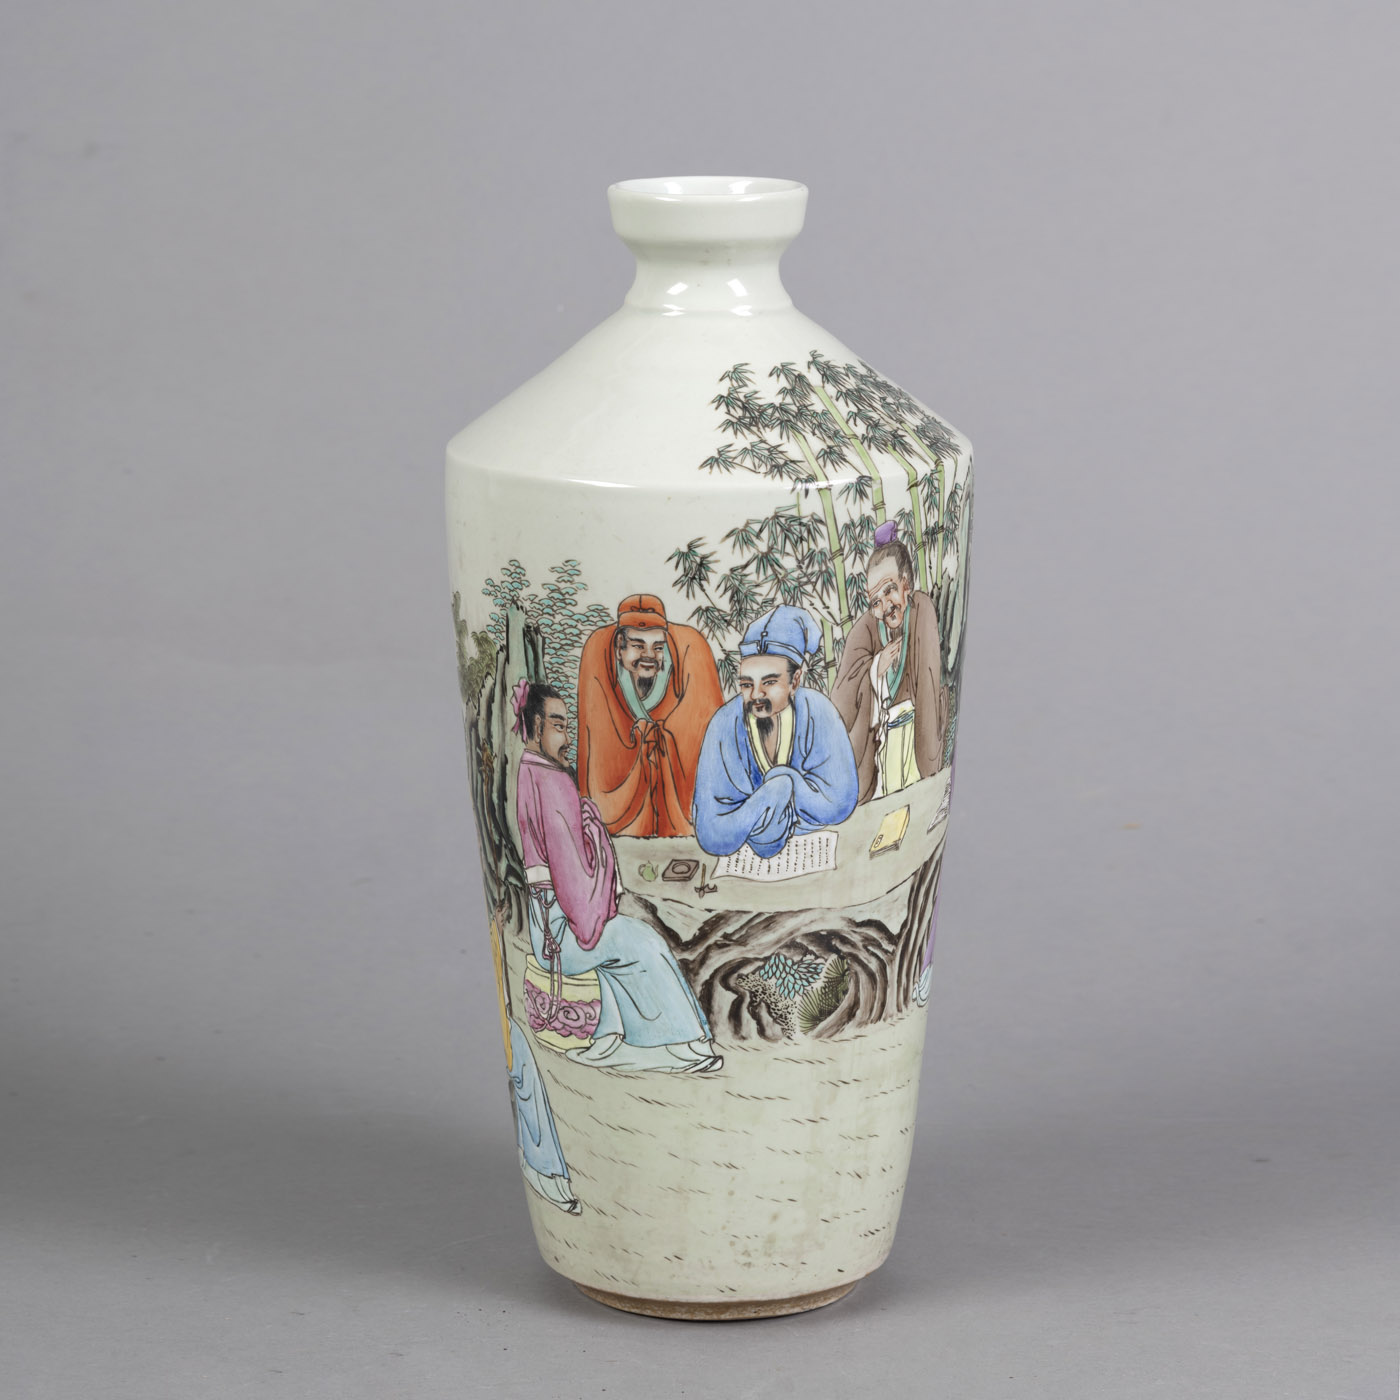 <b>A 'FAMILLE ROSE' PORCELAIN VASE DEPICTING THE SEVEN SAGES OF THE BAMBOO GROVE</b>